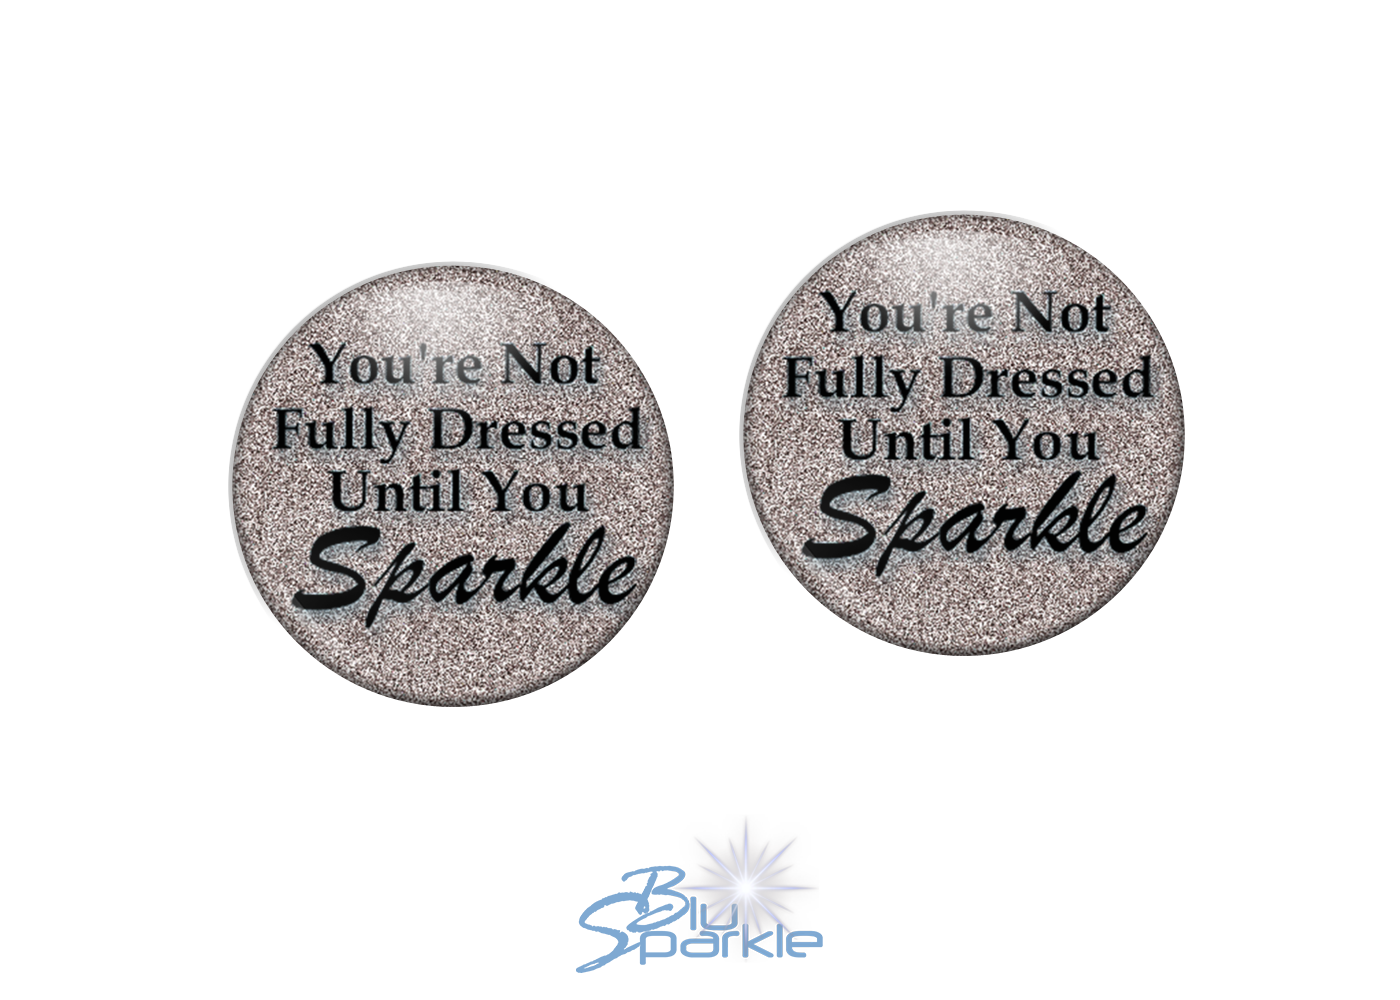 You’re Not Fully Dressed Until You Sparkle - Earrings